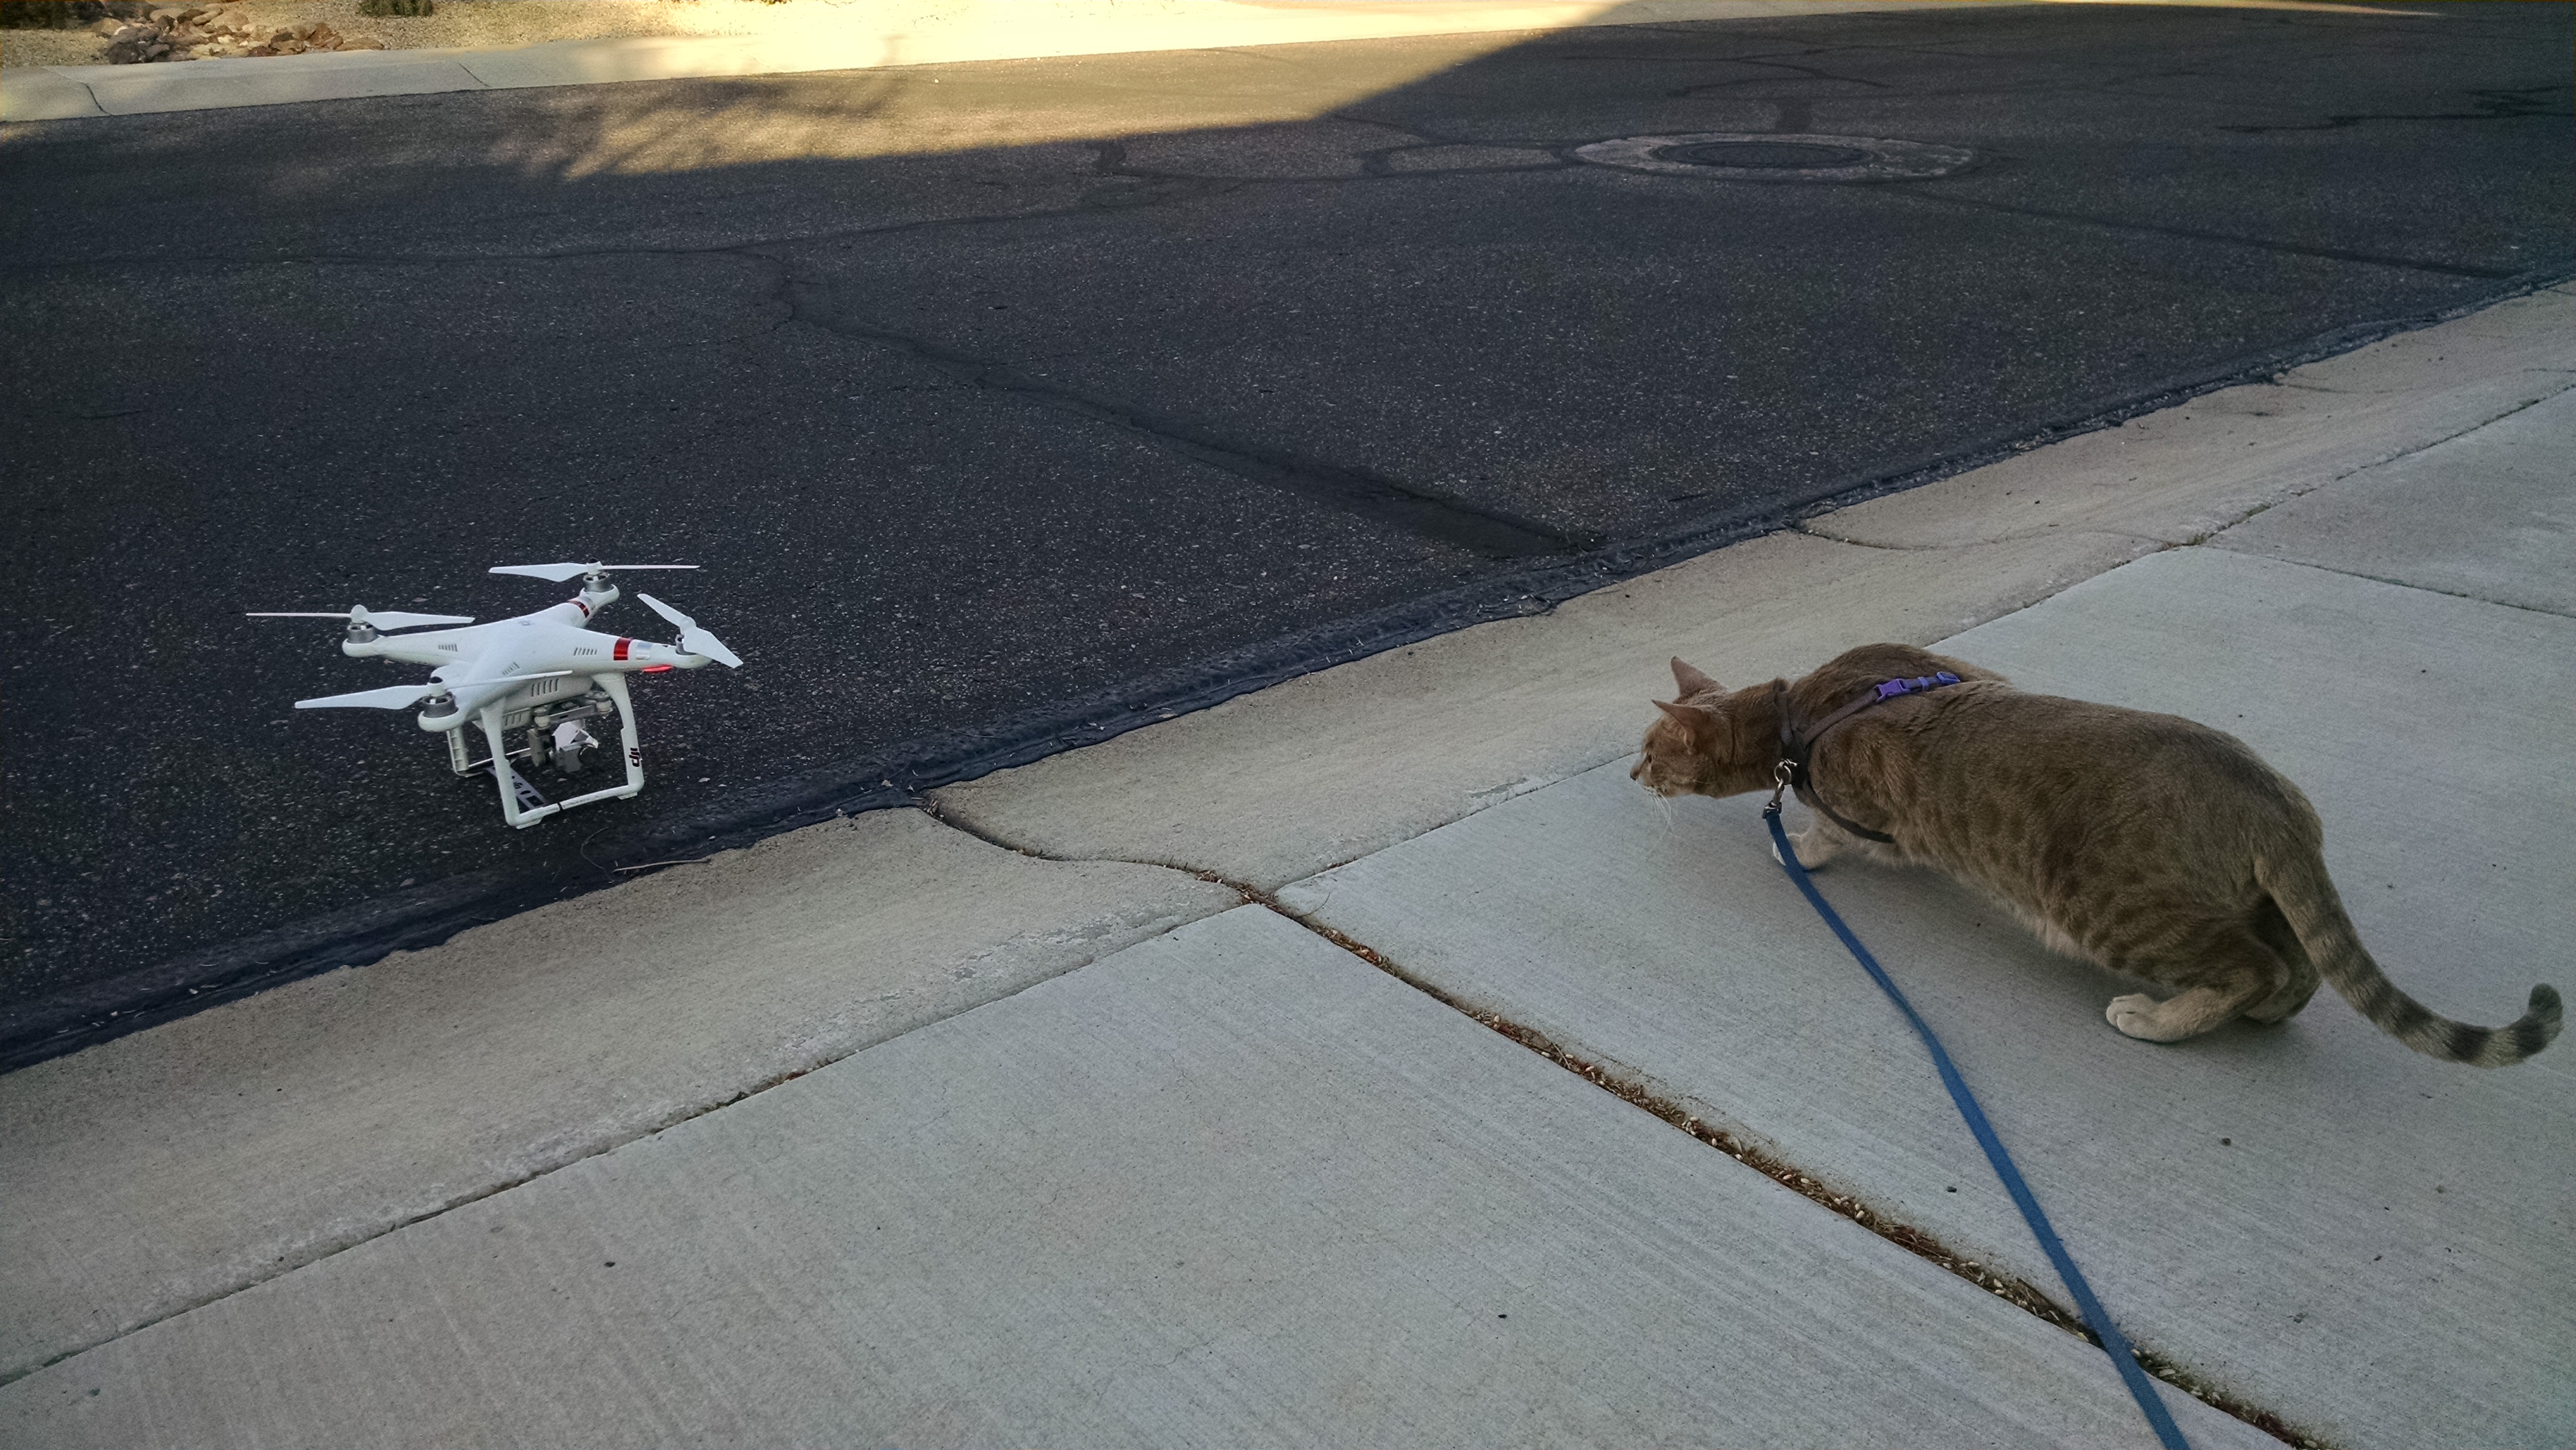 Joe Dobrow photo of a cat and a drone